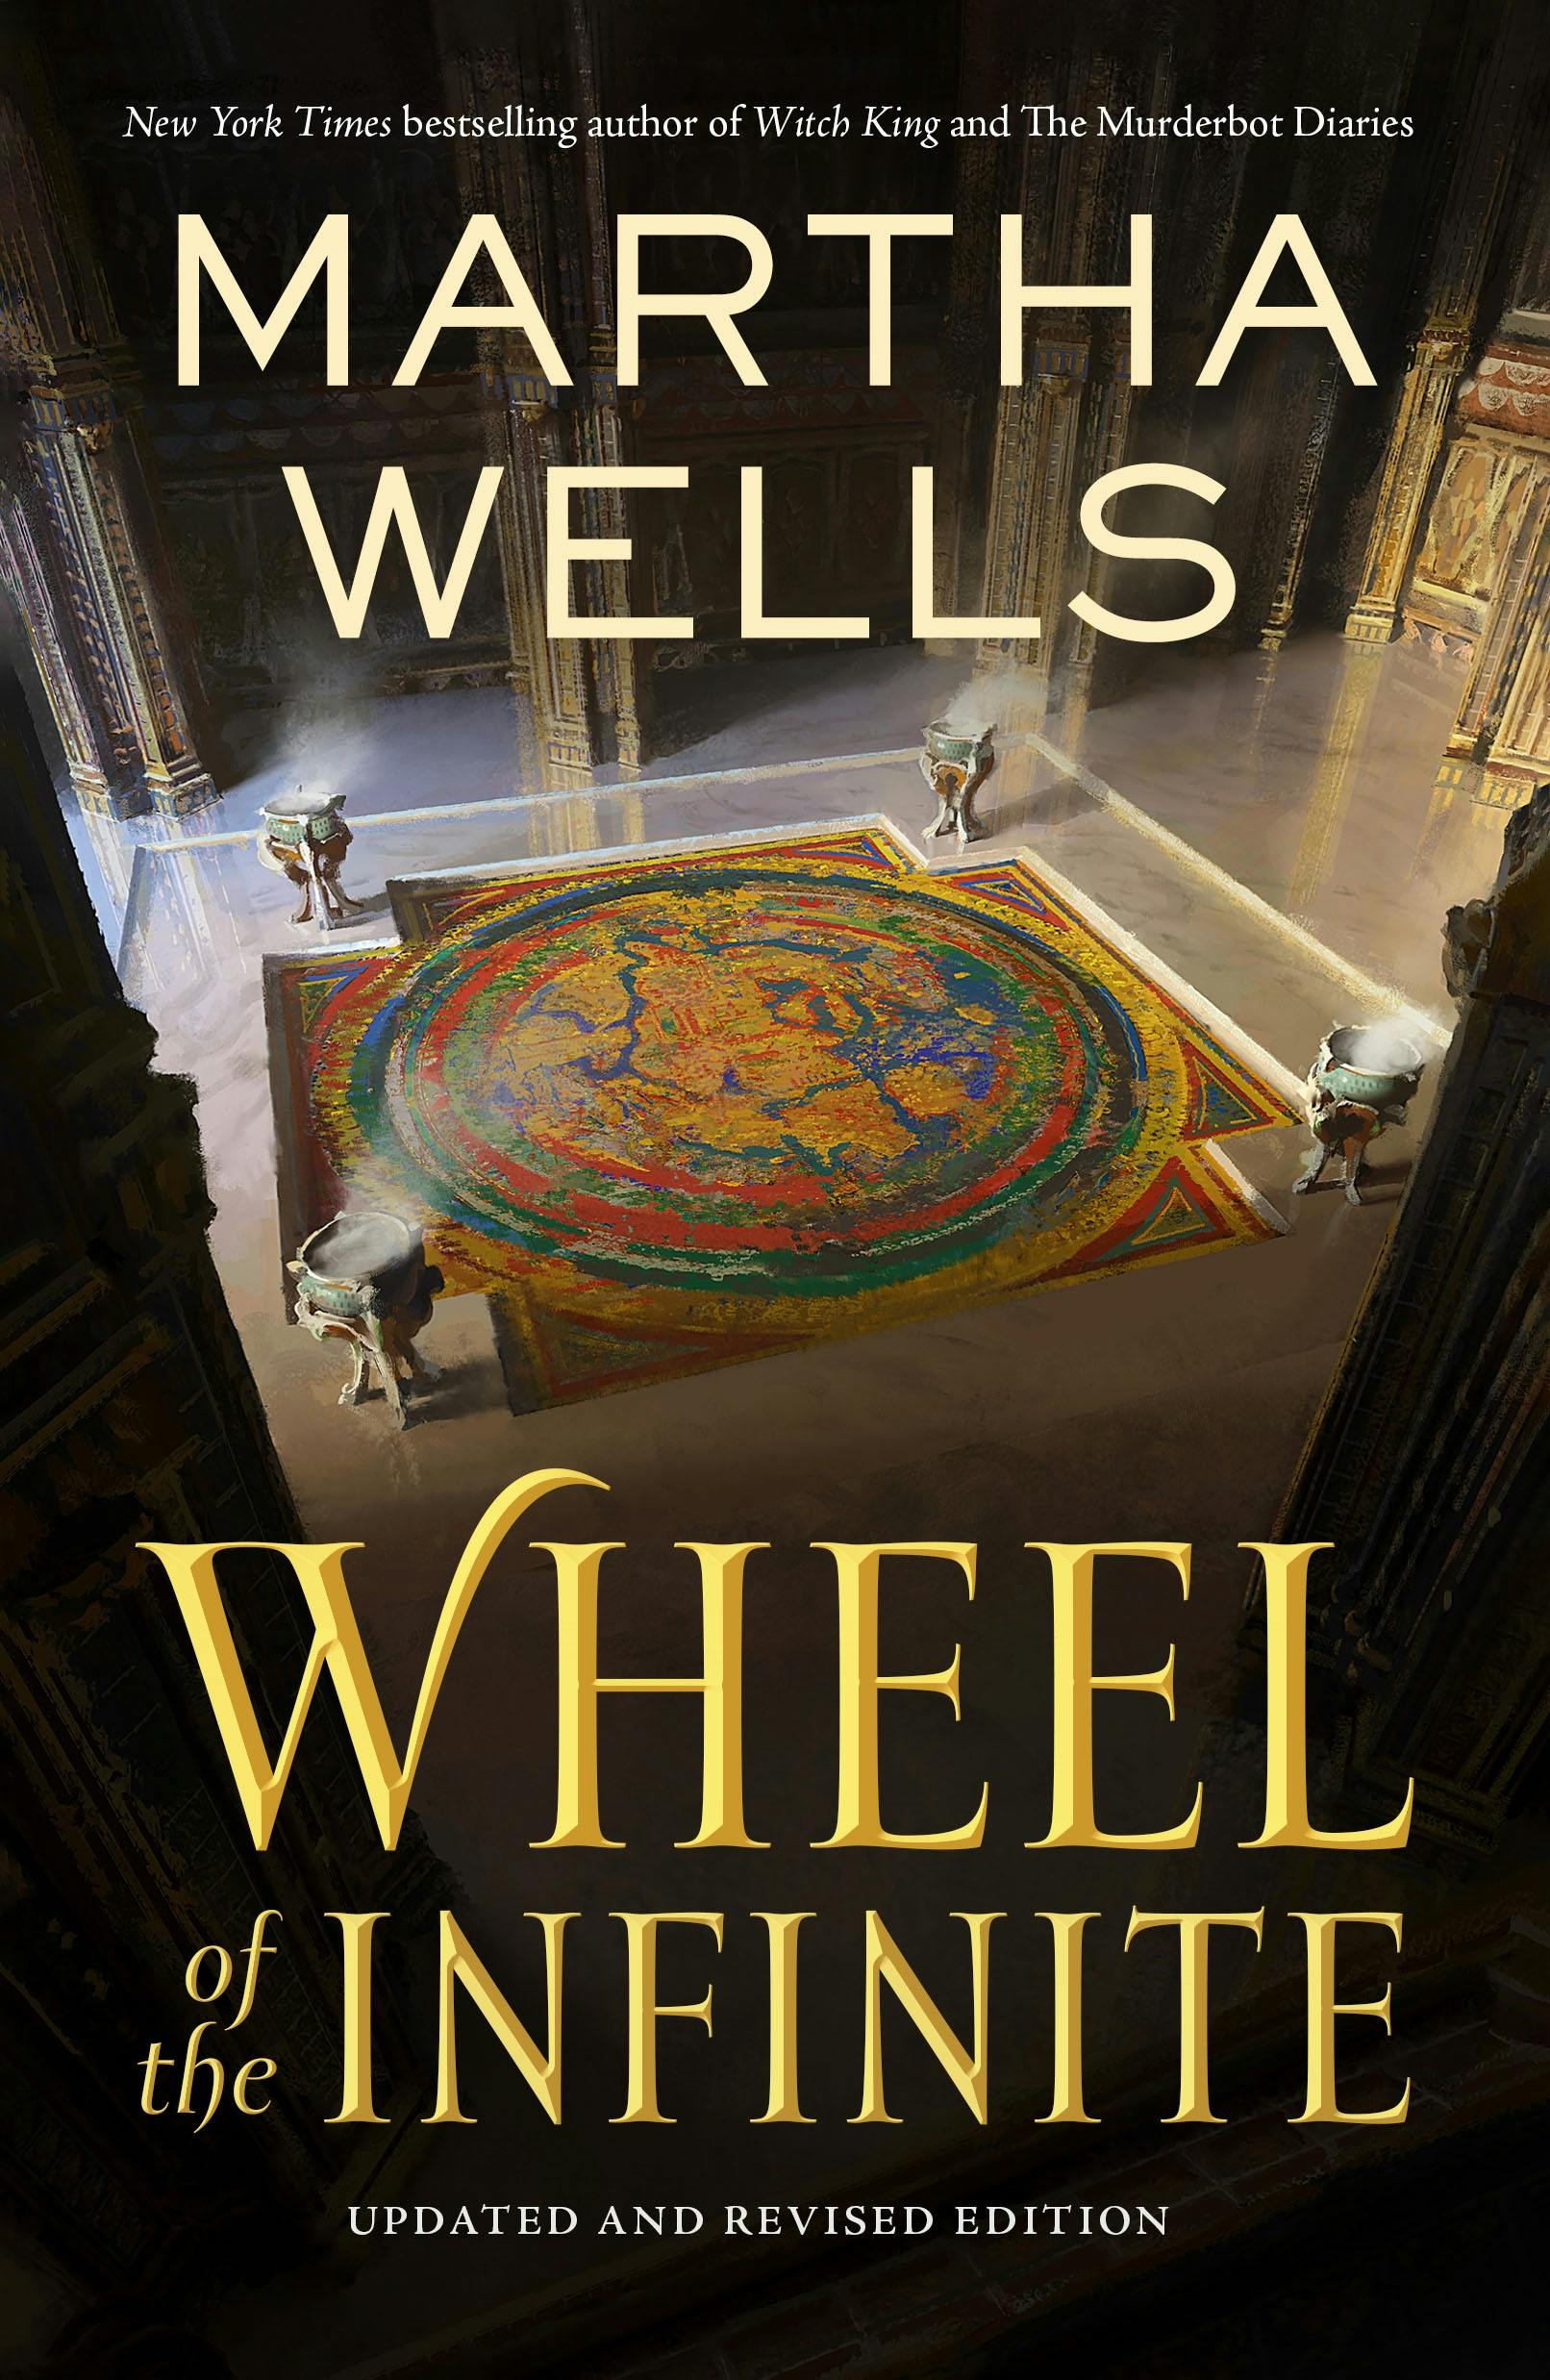 Cover for the book titled as: Wheel of the Infinite